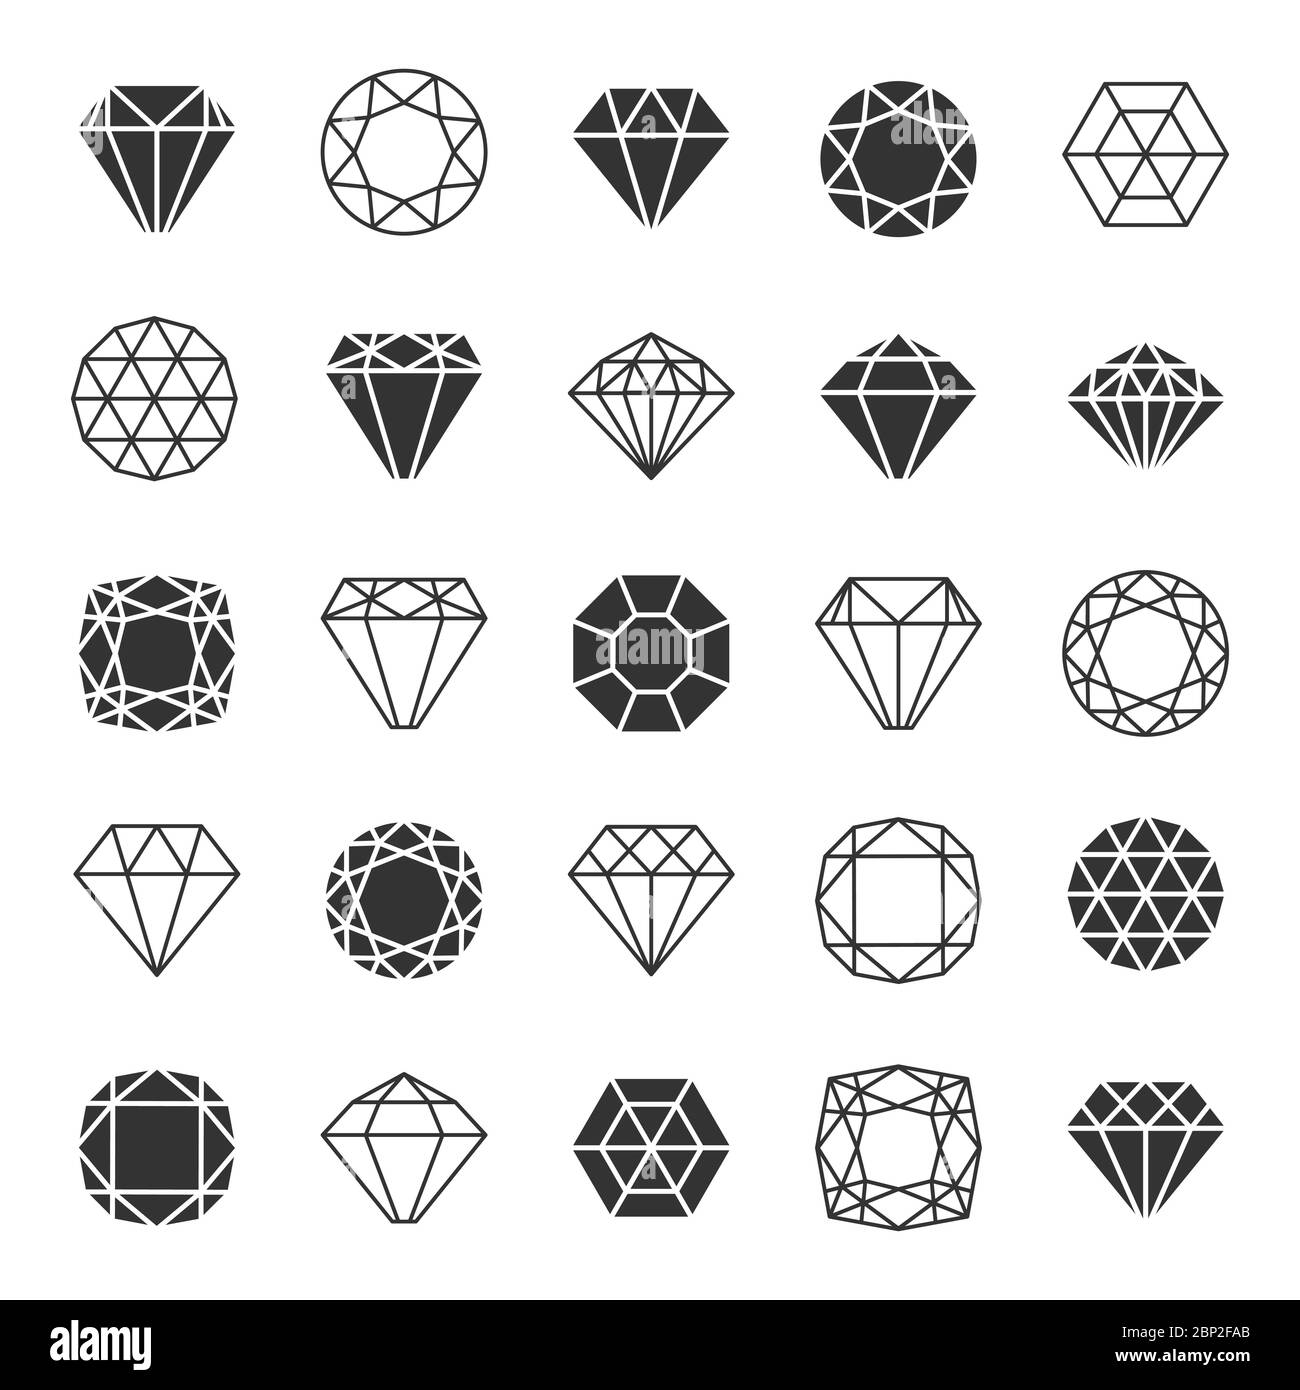 Diamond or brilliants icons set. Line and silhouette diamonds vector collection Stock Vector